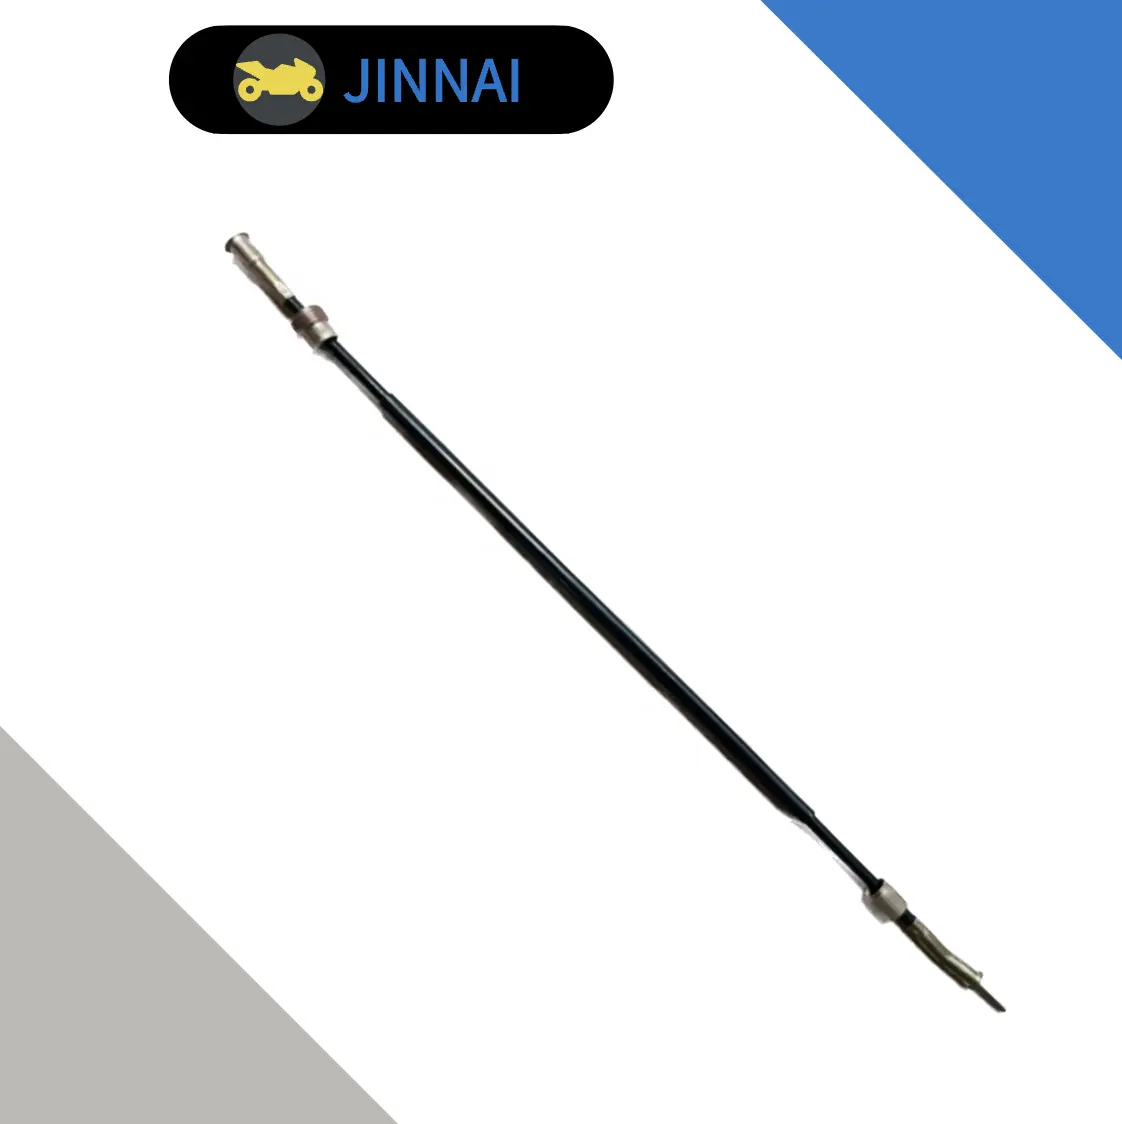 JINNAI motorcycle brake cable speedo rpm clutch throttle cable